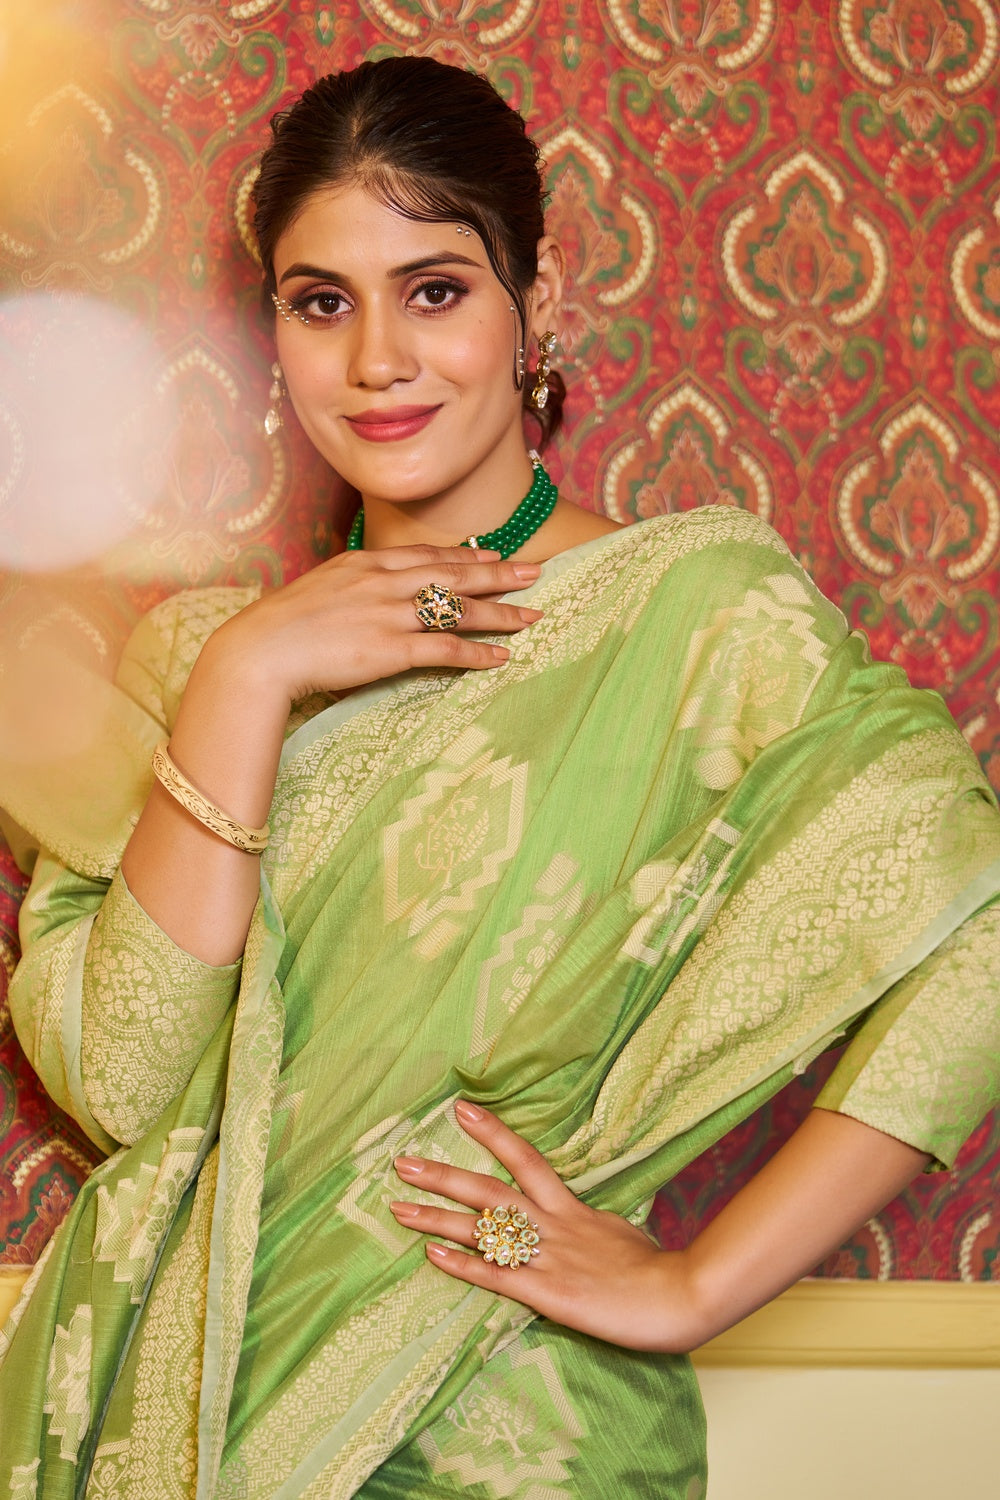 Light Green Cotton Saree With Lucknowi Weaving Work